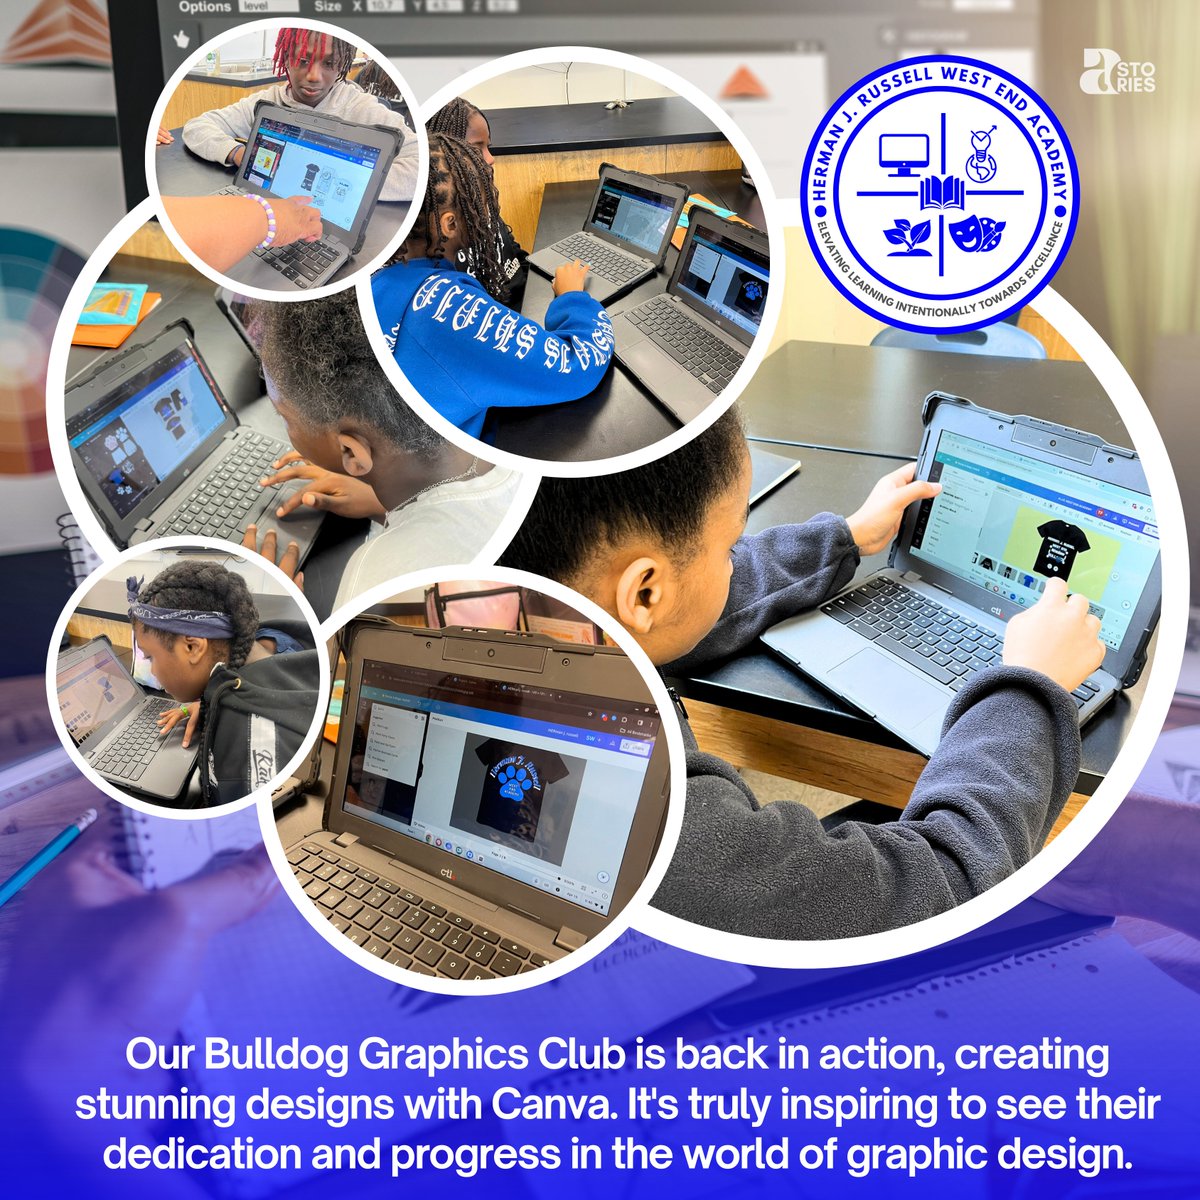 Our Bulldog Graphics Club is back in action, creating stunning designs with Canva. It's truly inspiring to see their dedication and progress in the world of graphic design.